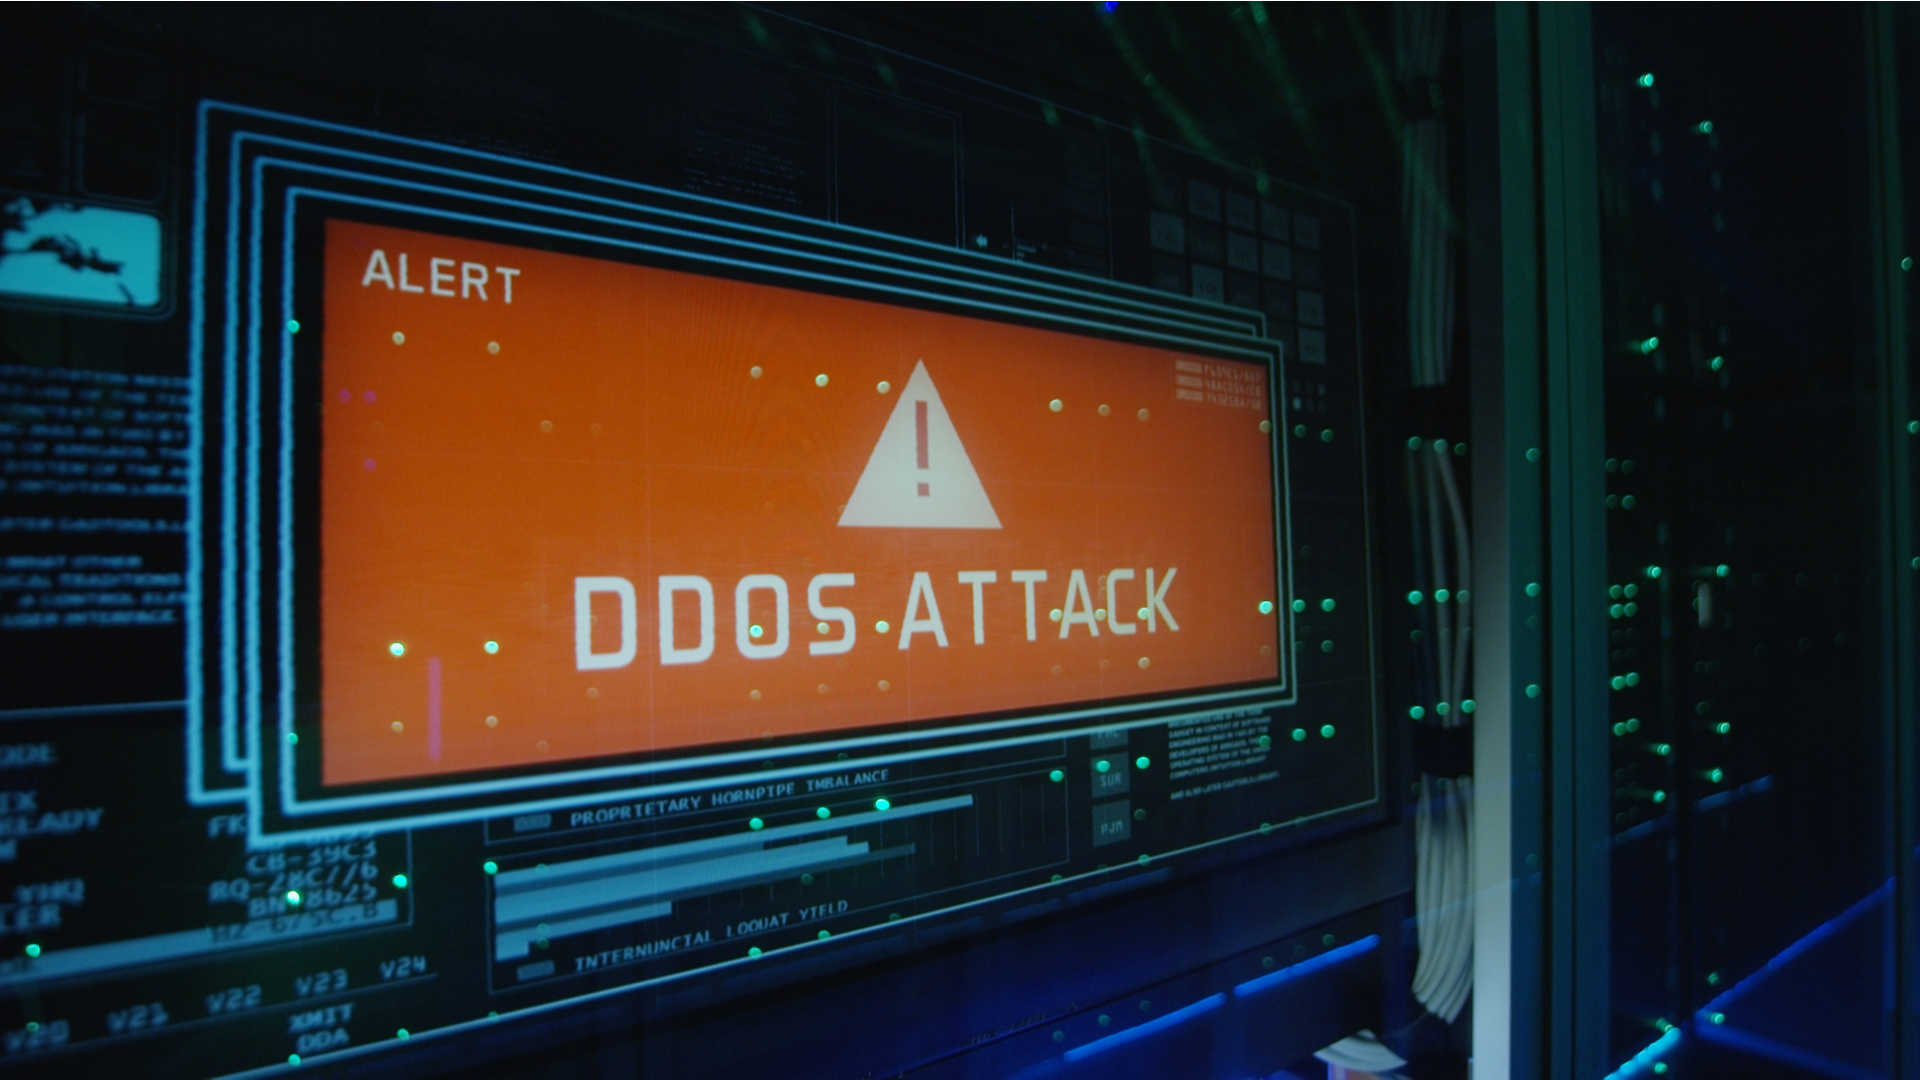 DDoS attack alert showing on a screen